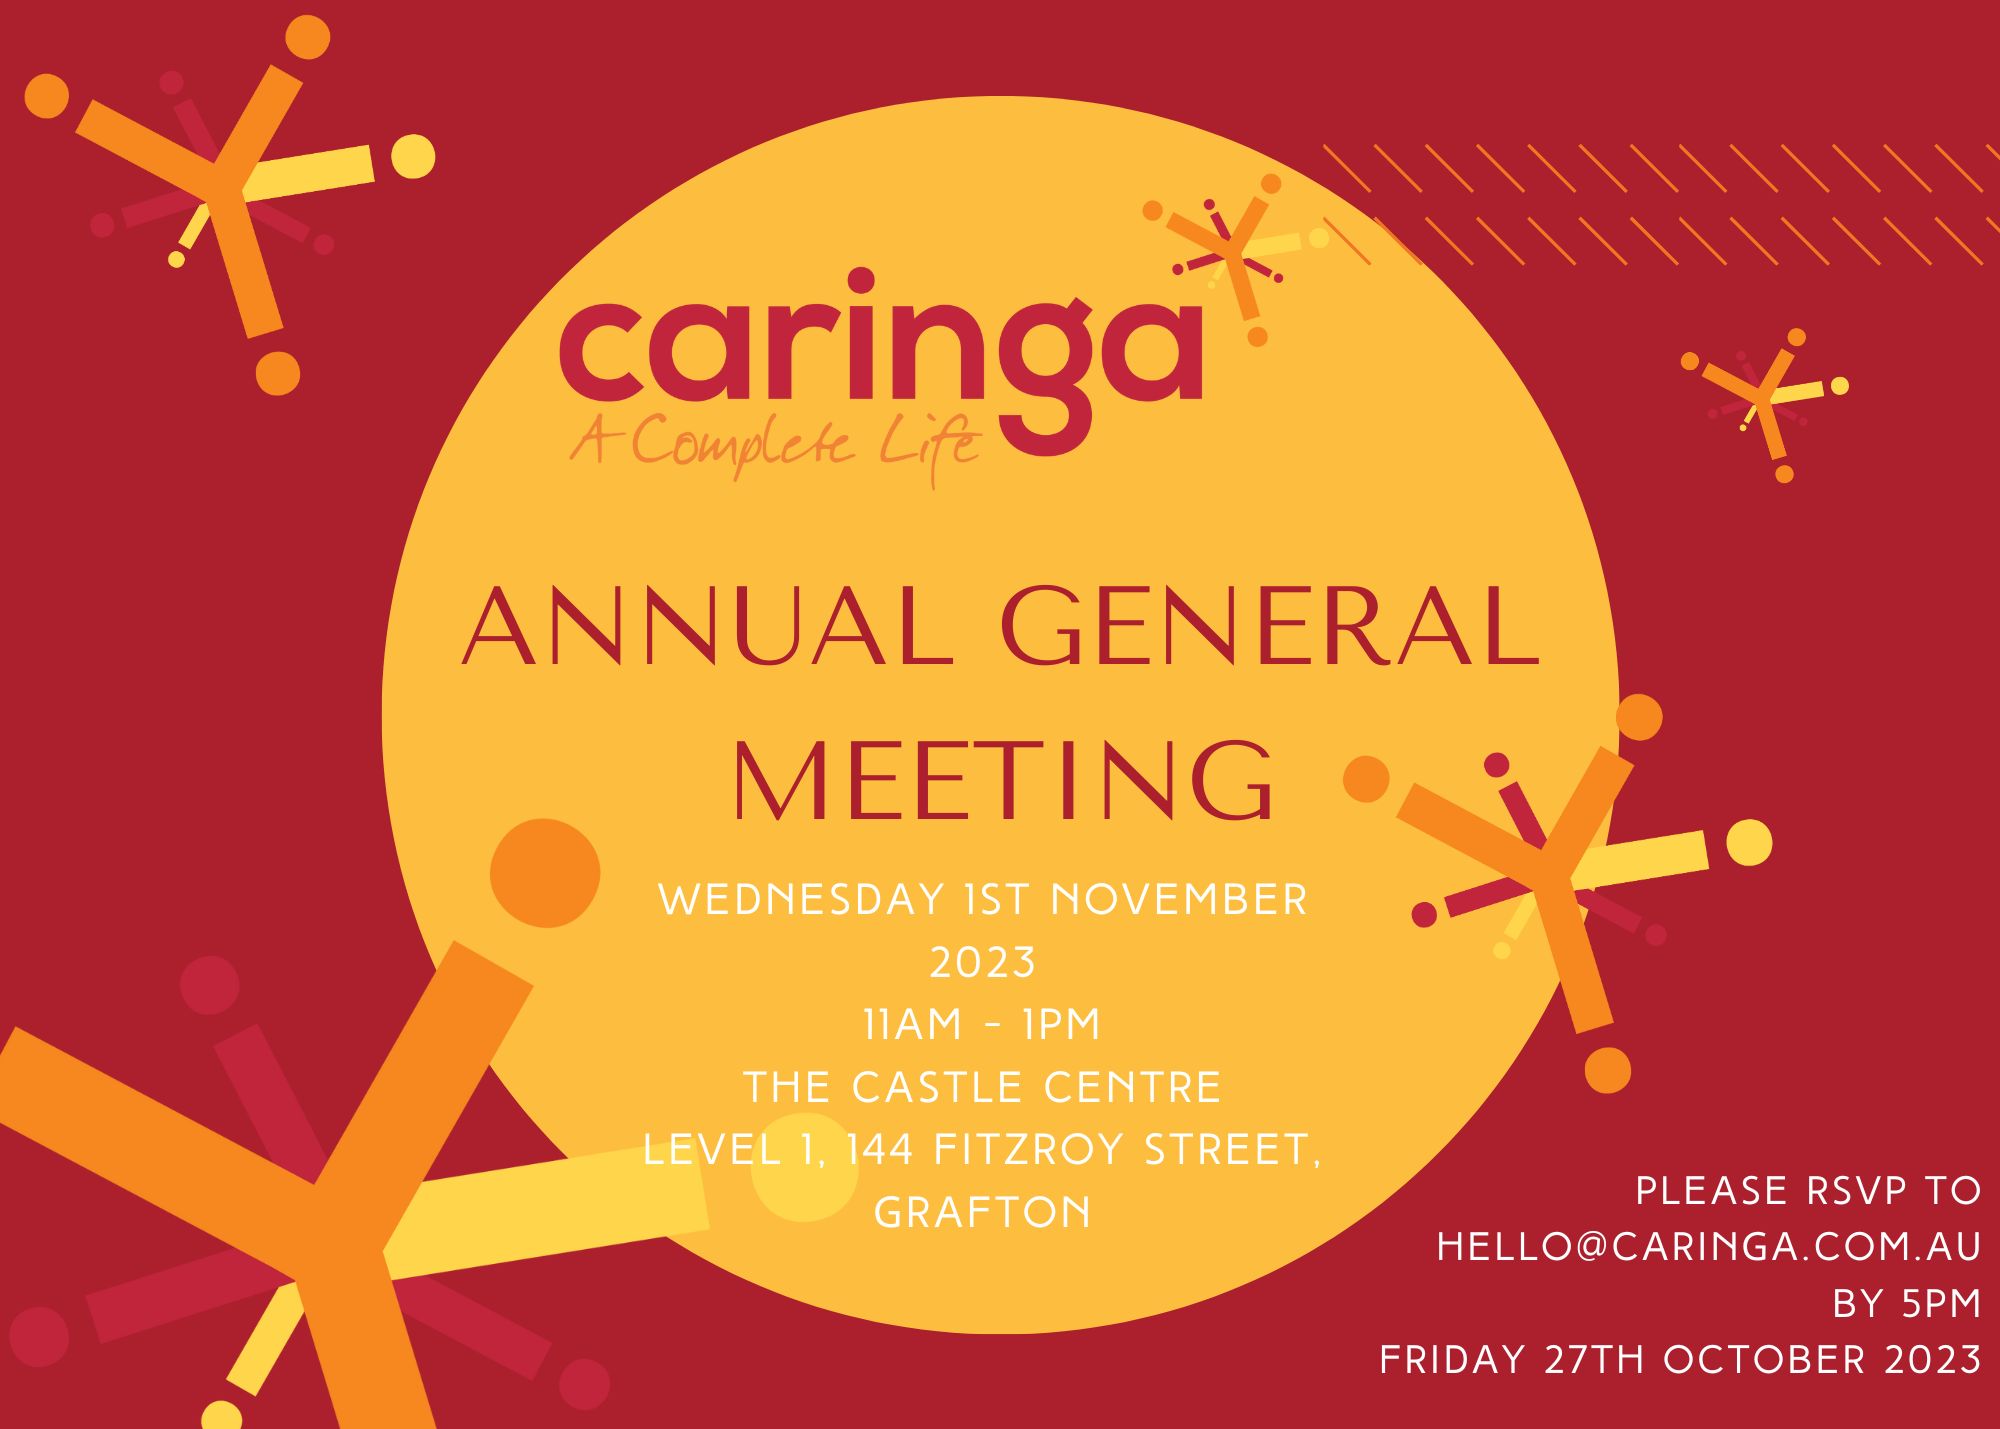 Notice of Annual General Meeting 2023